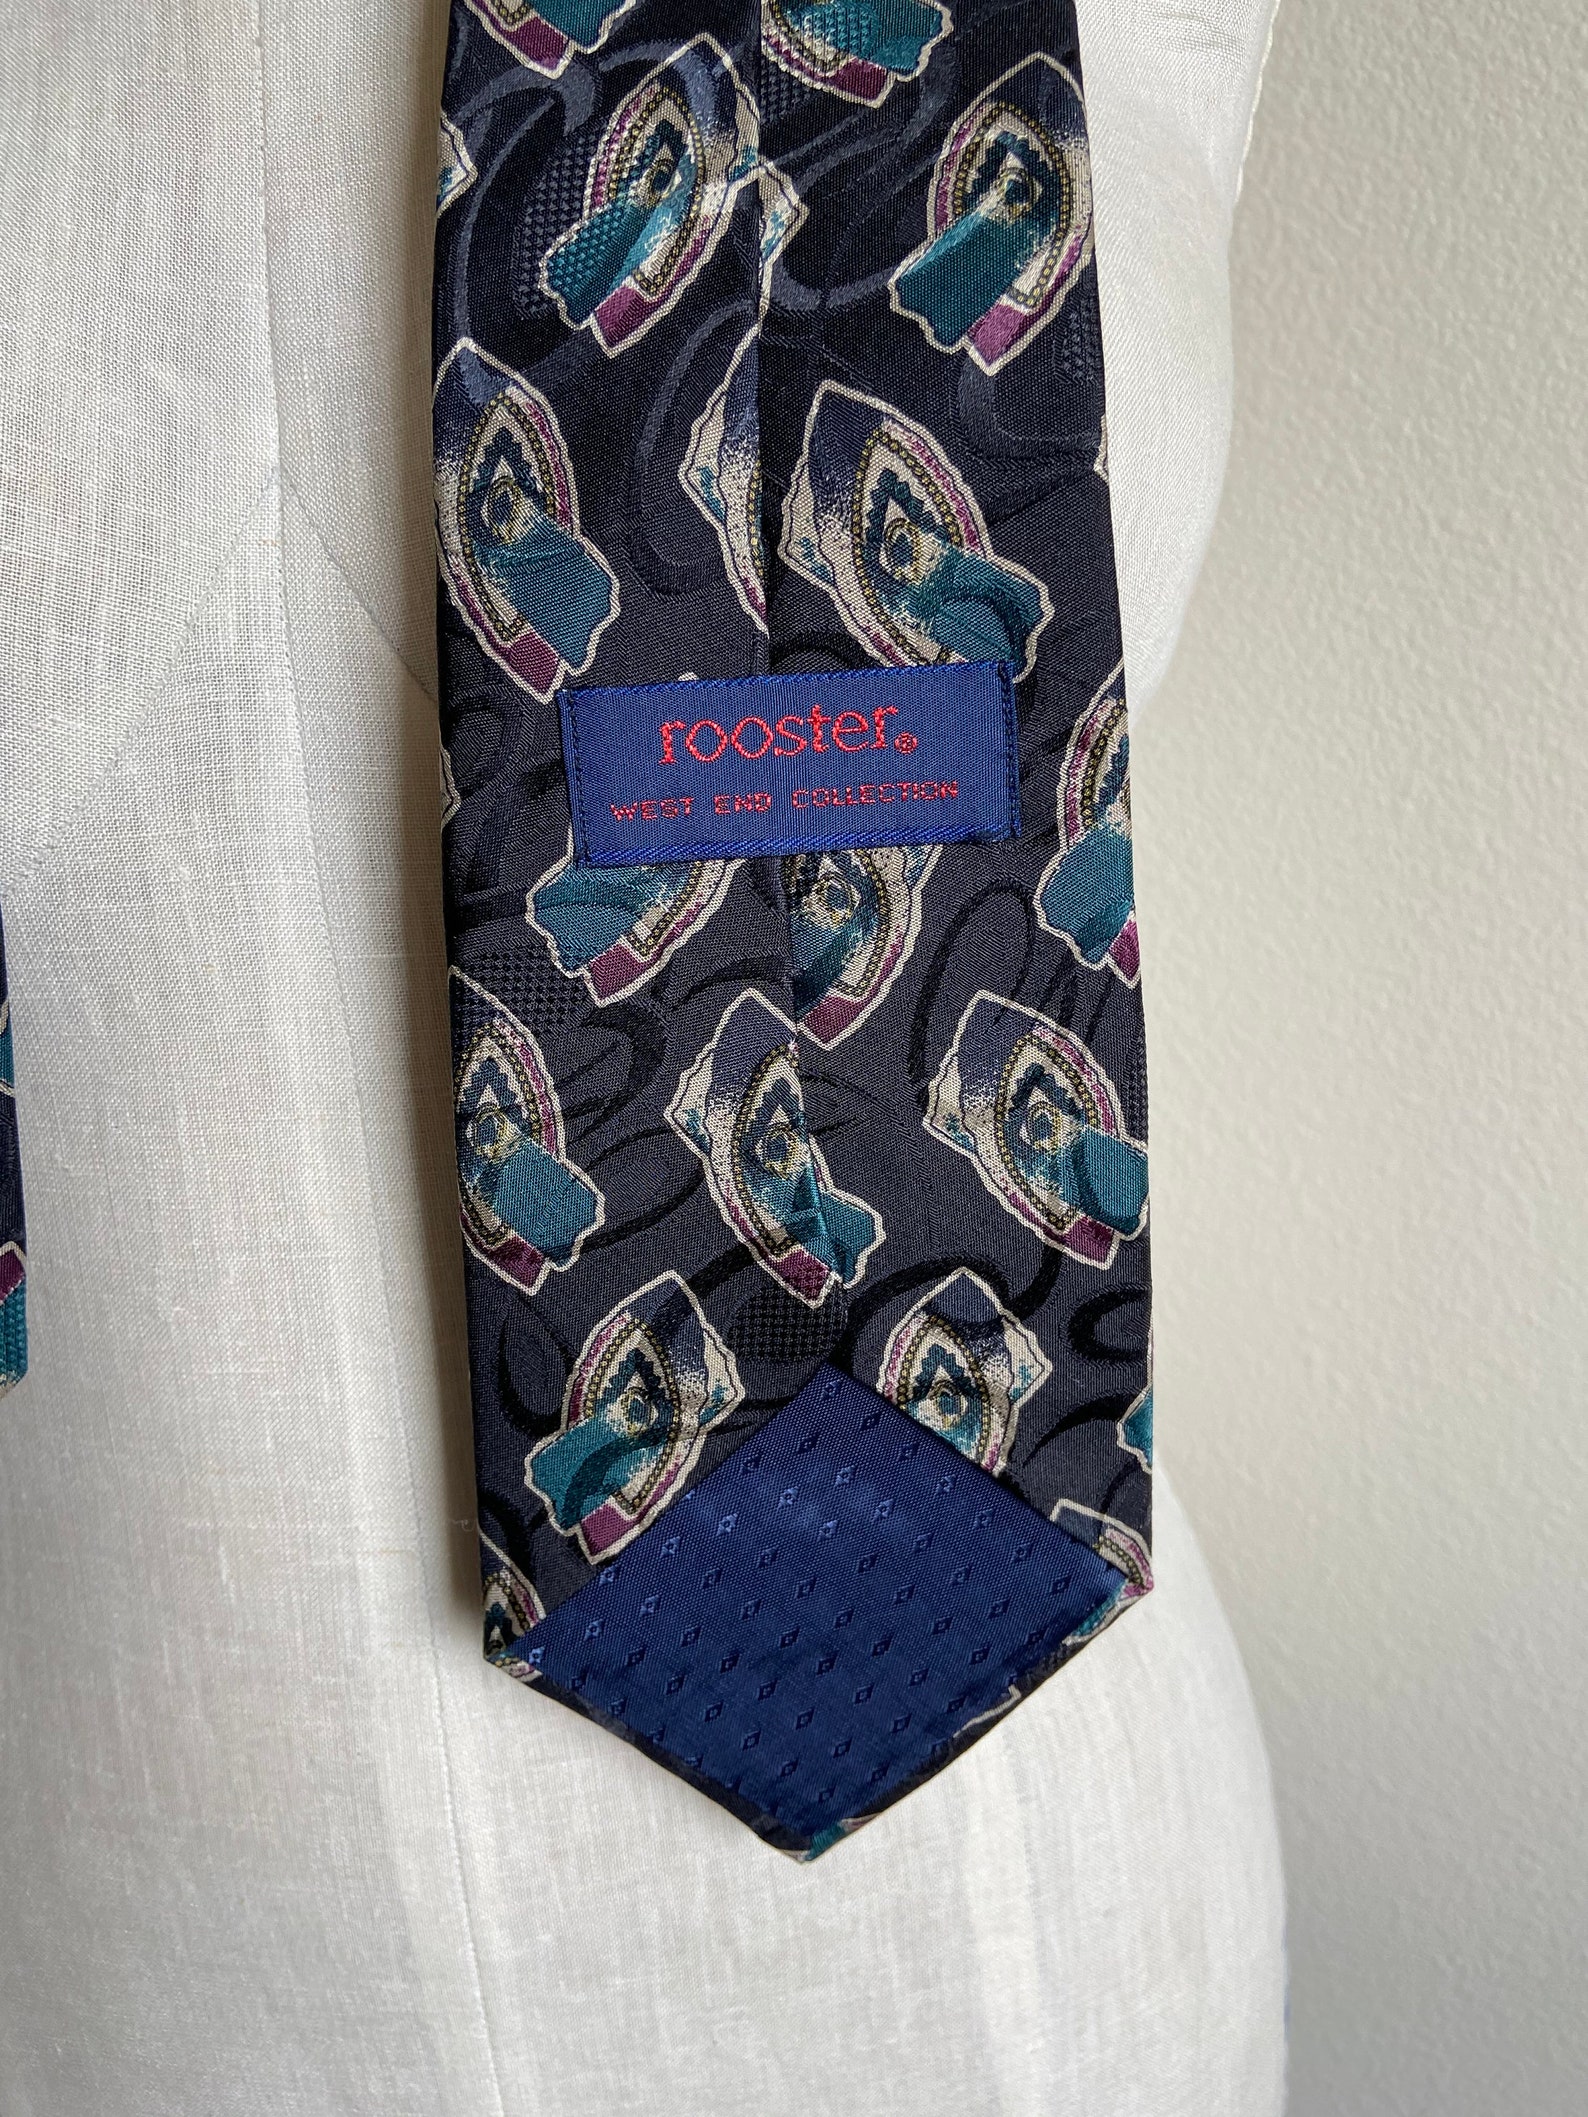 Vintage 1990s Rooster West End Collection Silk Tie Abstract - Etsy